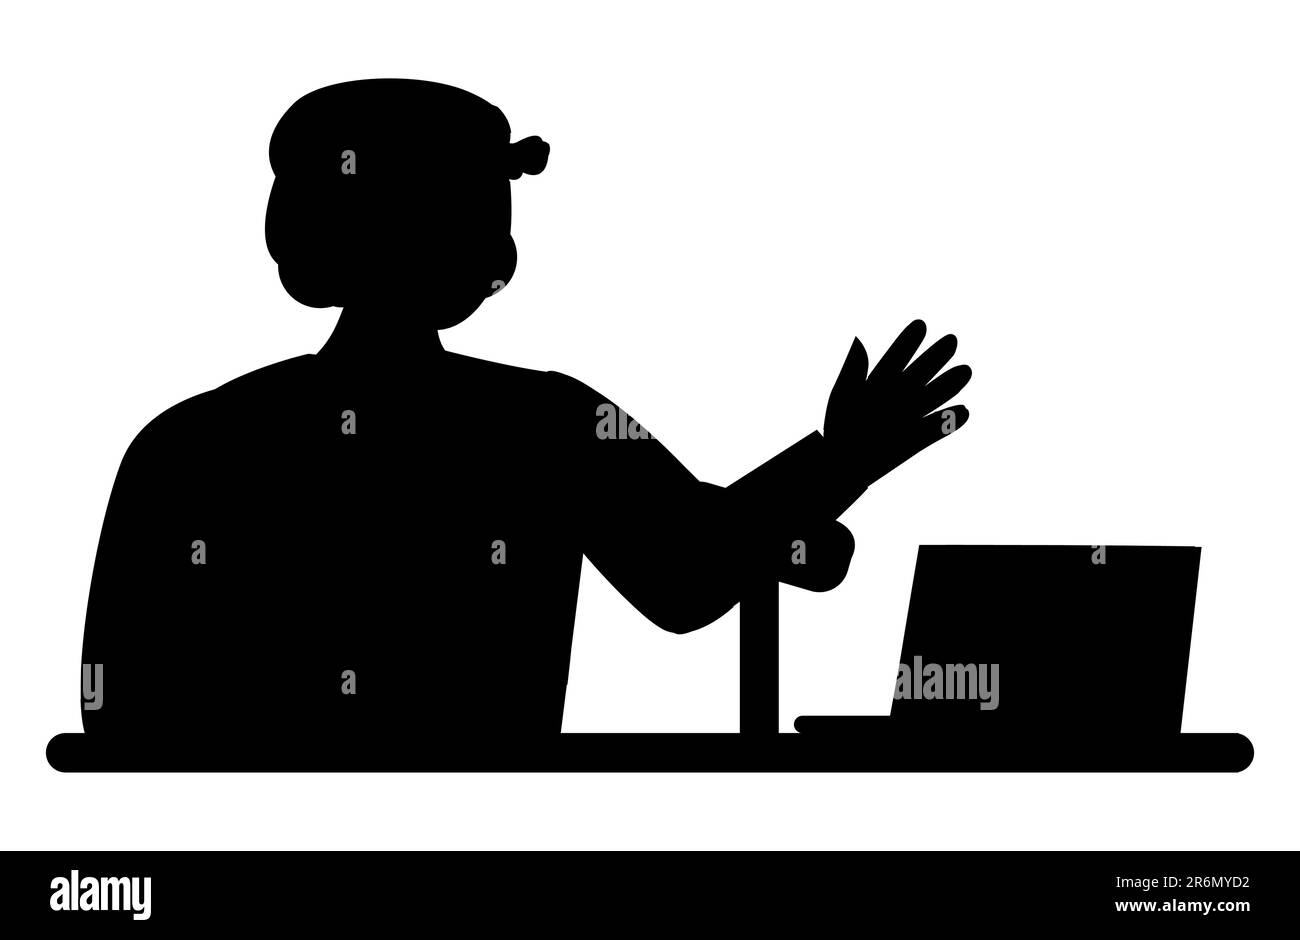 Black silhouette of a man waving at a person on the laptop while in a zoom call, online video call, chatting, greeting a distance friend, vector illus Stock Vector